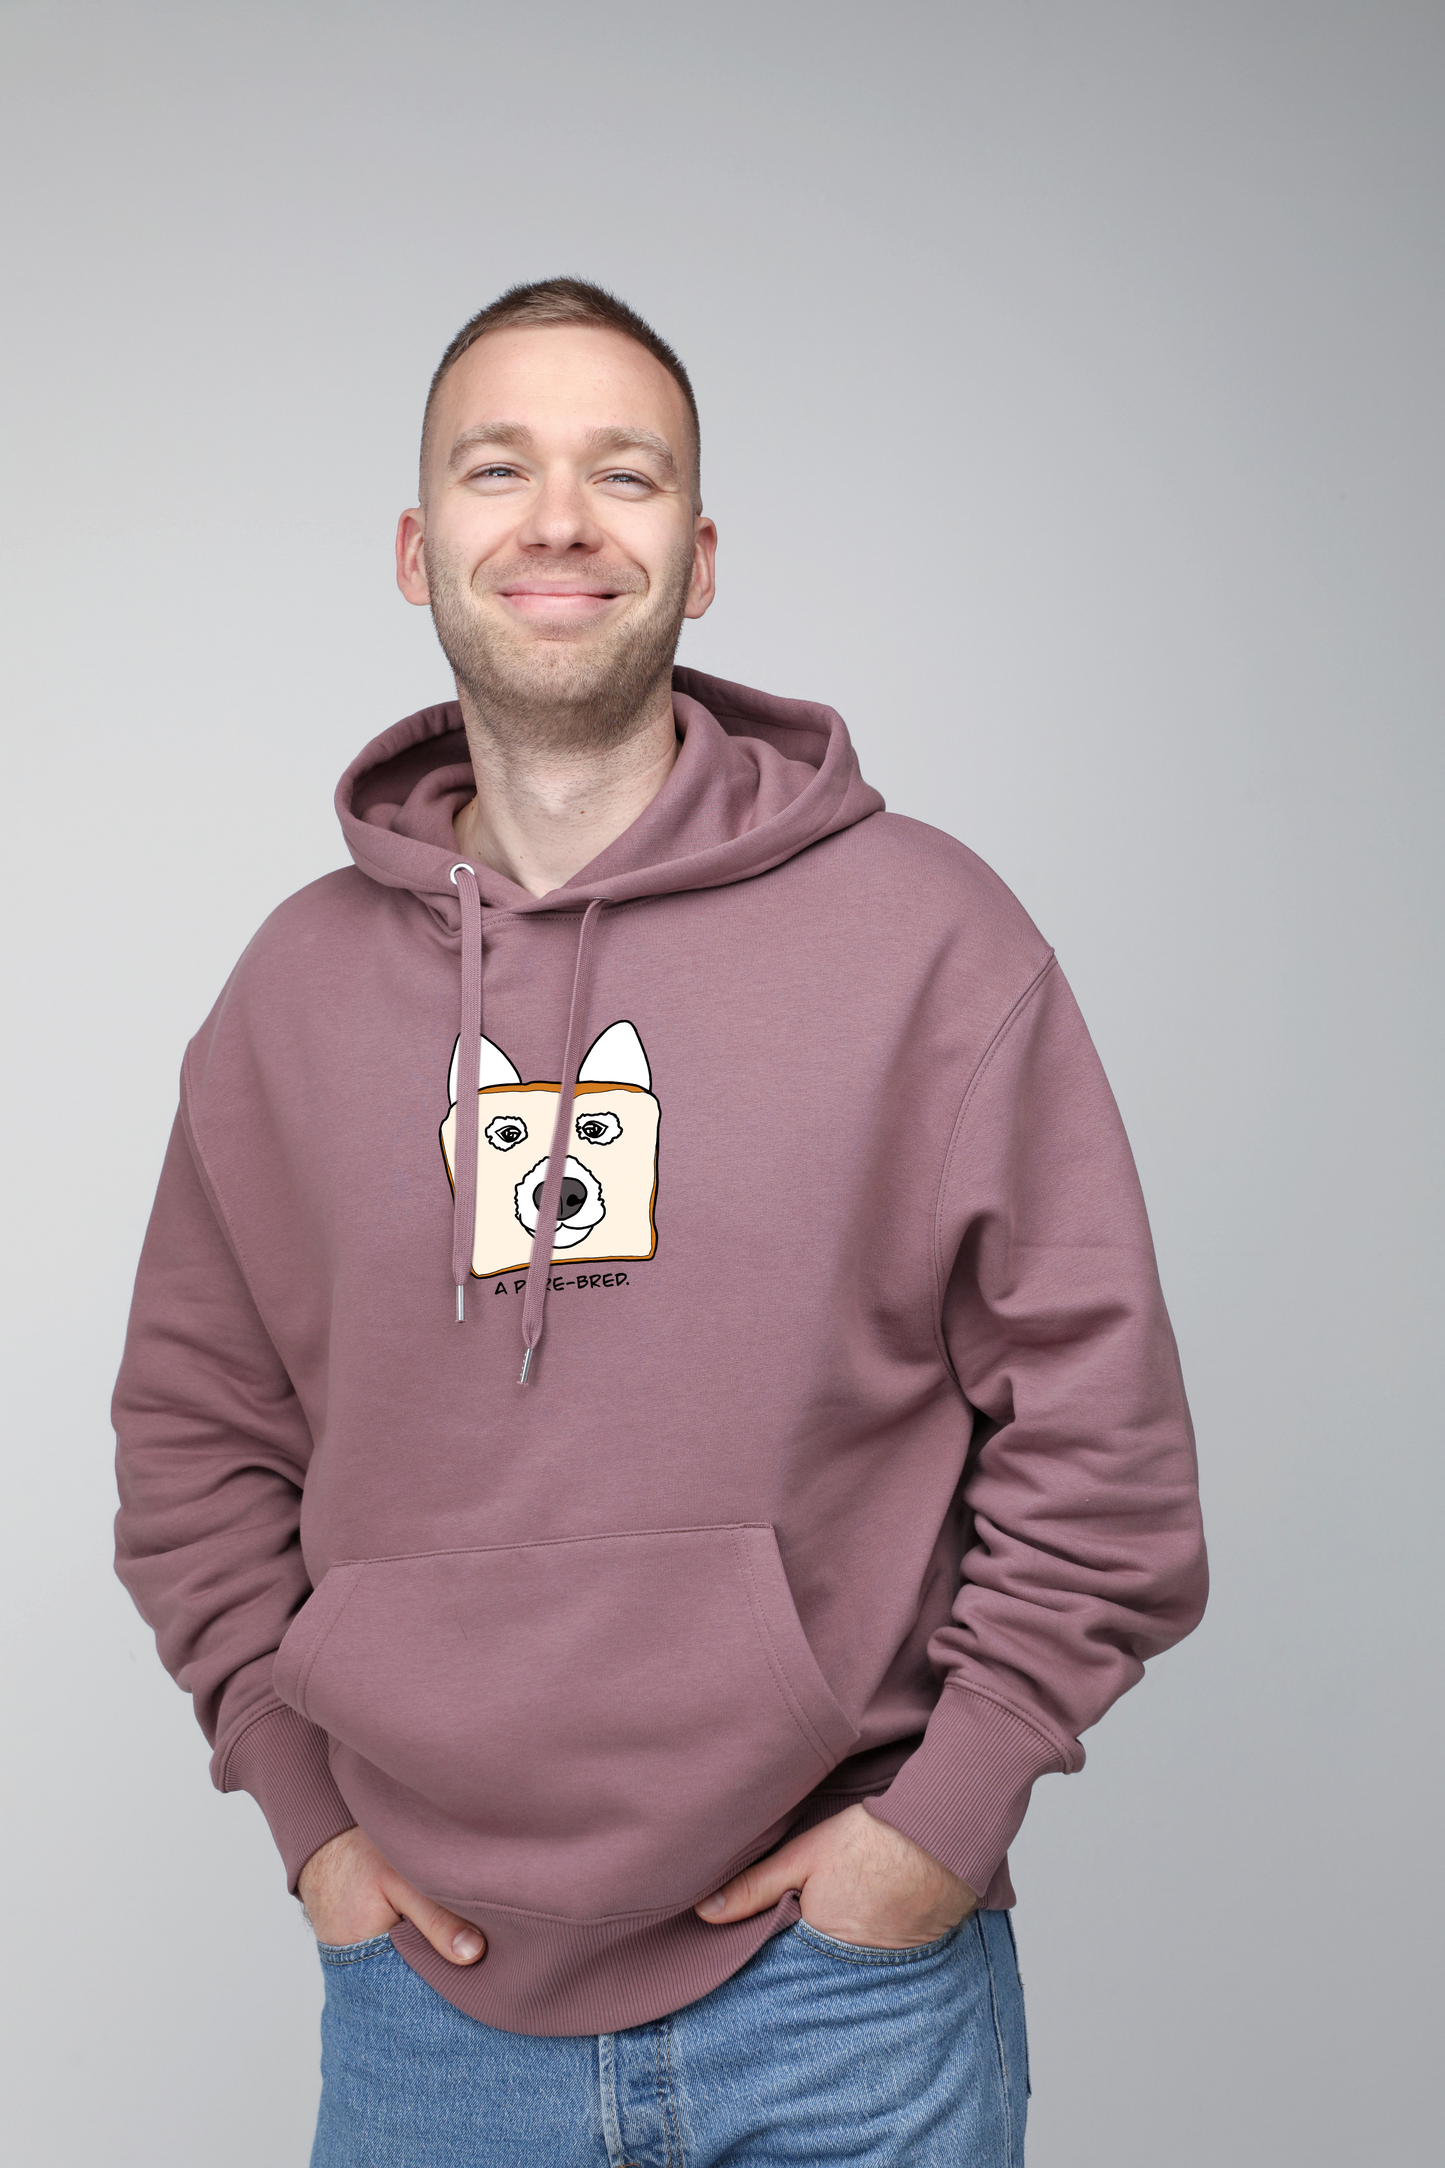 Pure-bred dog | Hoodie with dog. Oversize fit | Unisex - premium dog goods handmade in Europe by animalistus